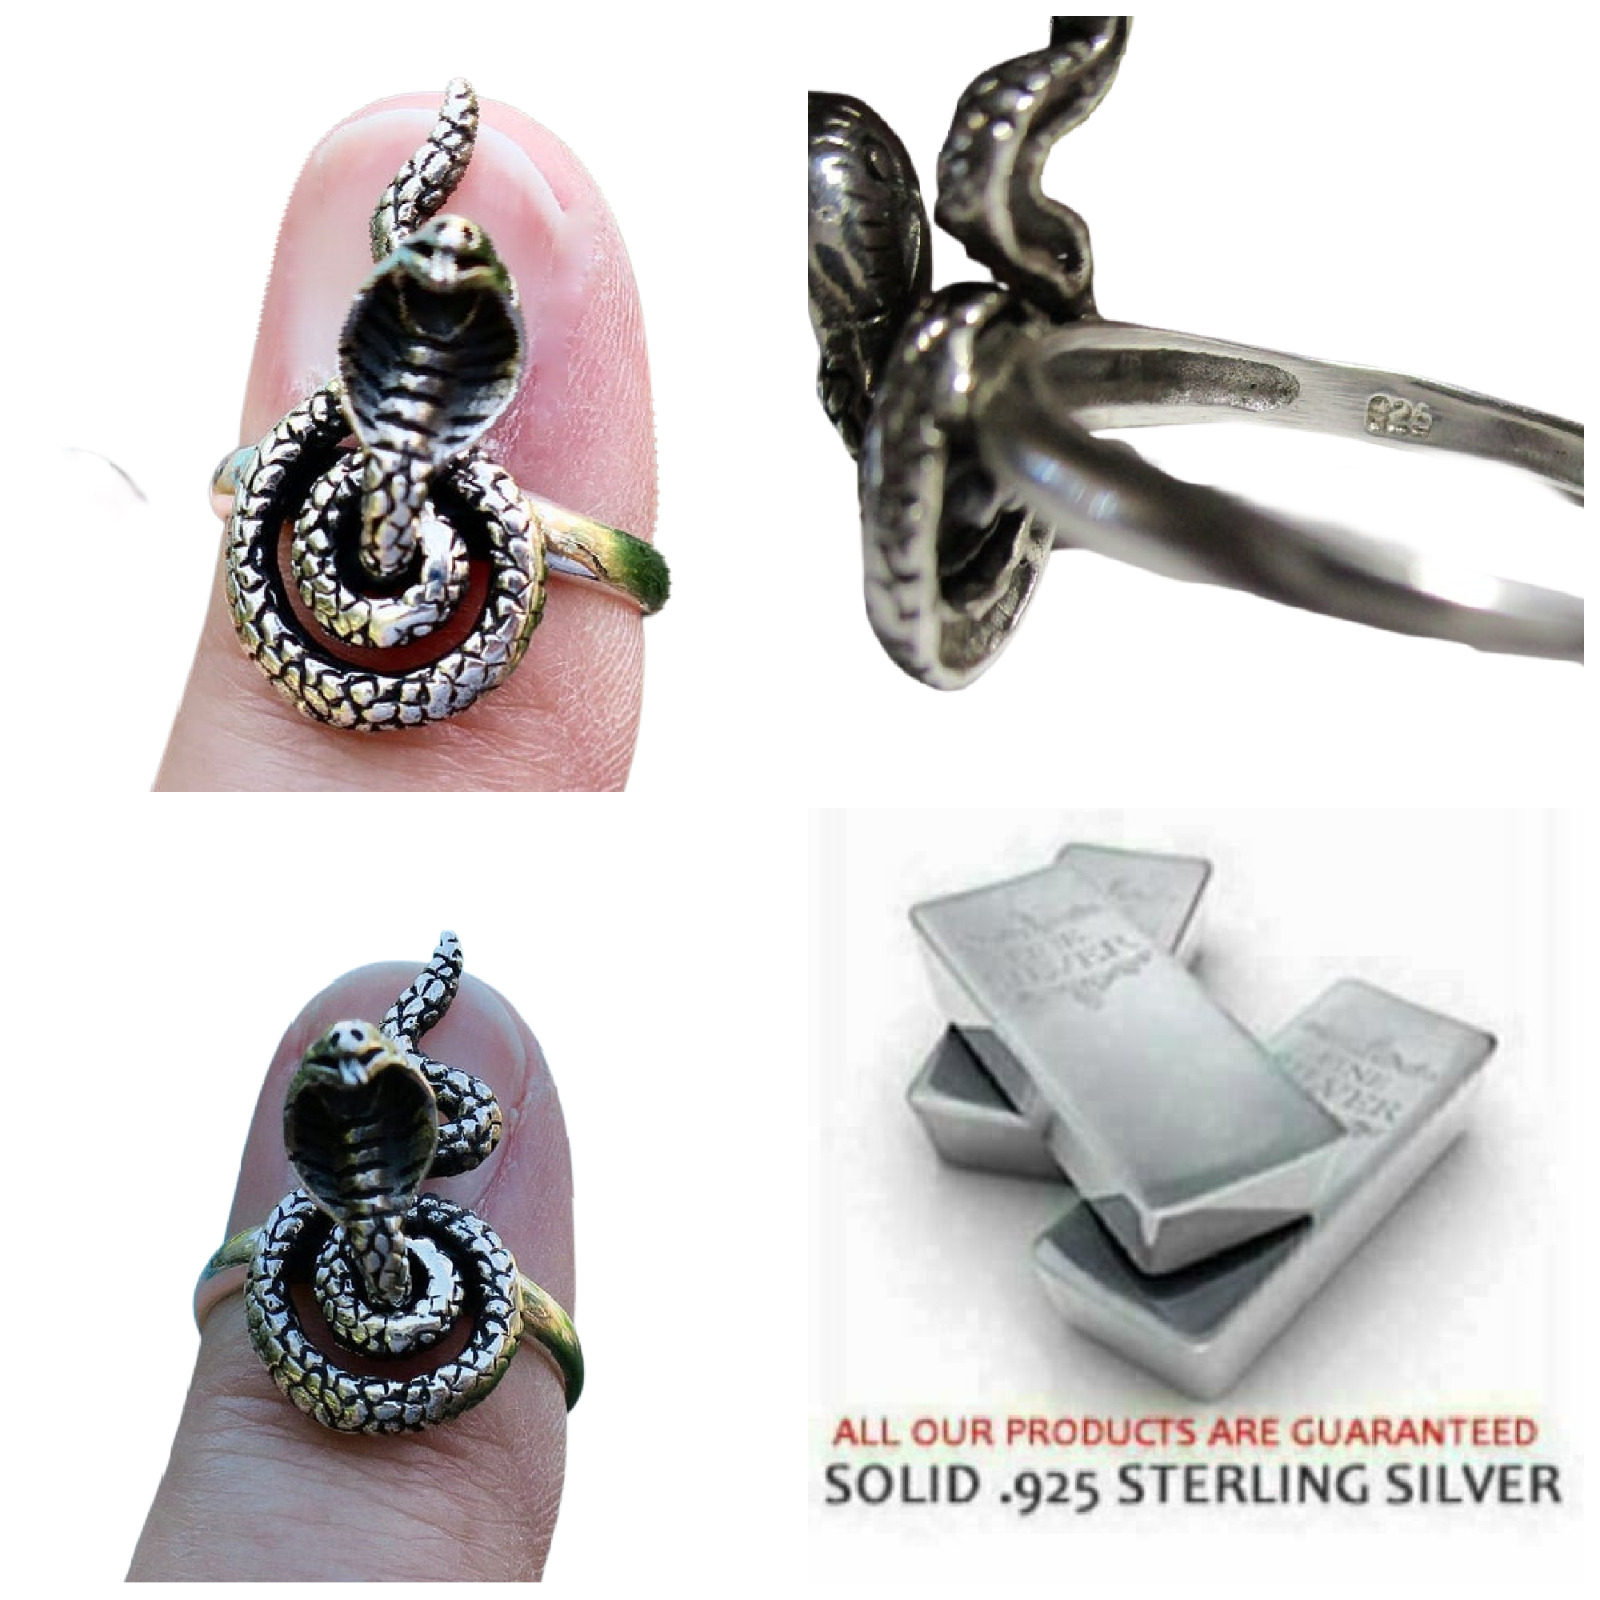 Solid Sterling Silver Cobra Snake Ring Moves And Darts Stamped 925 Size 7 ,8